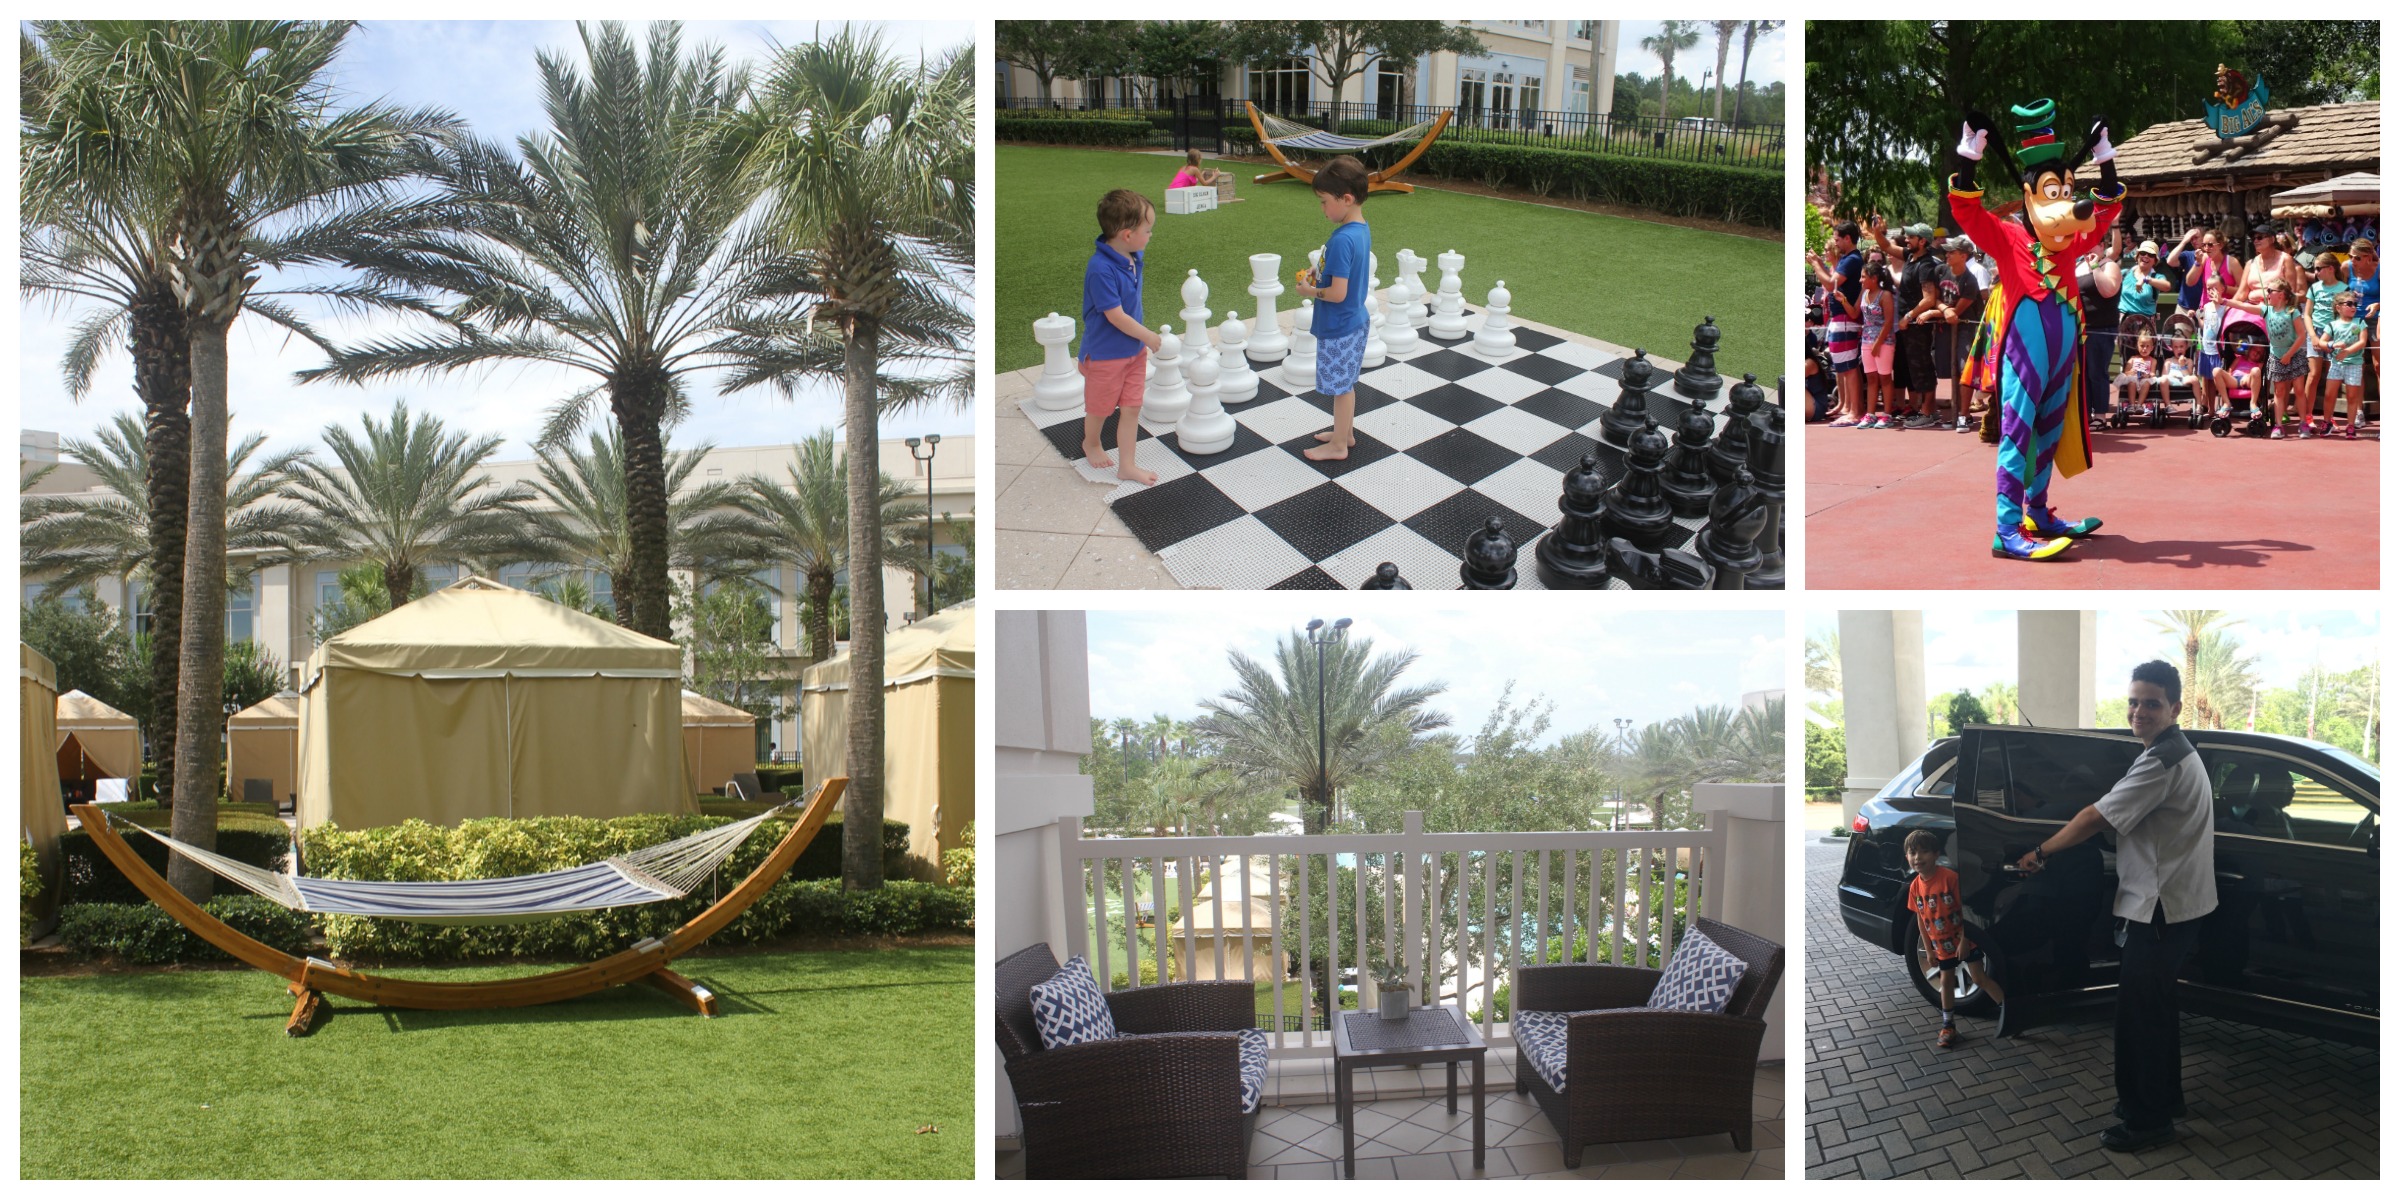 Transform Your Family Disney Trip into a Luxury Vacation at Waldorf Astoria Orlando | Luxury Walt Disney World Hotel | Luxury Disney Vacation | Luxury Orlando Resort| Disney with kids | Summer at the Waldorf Astoria Orlando